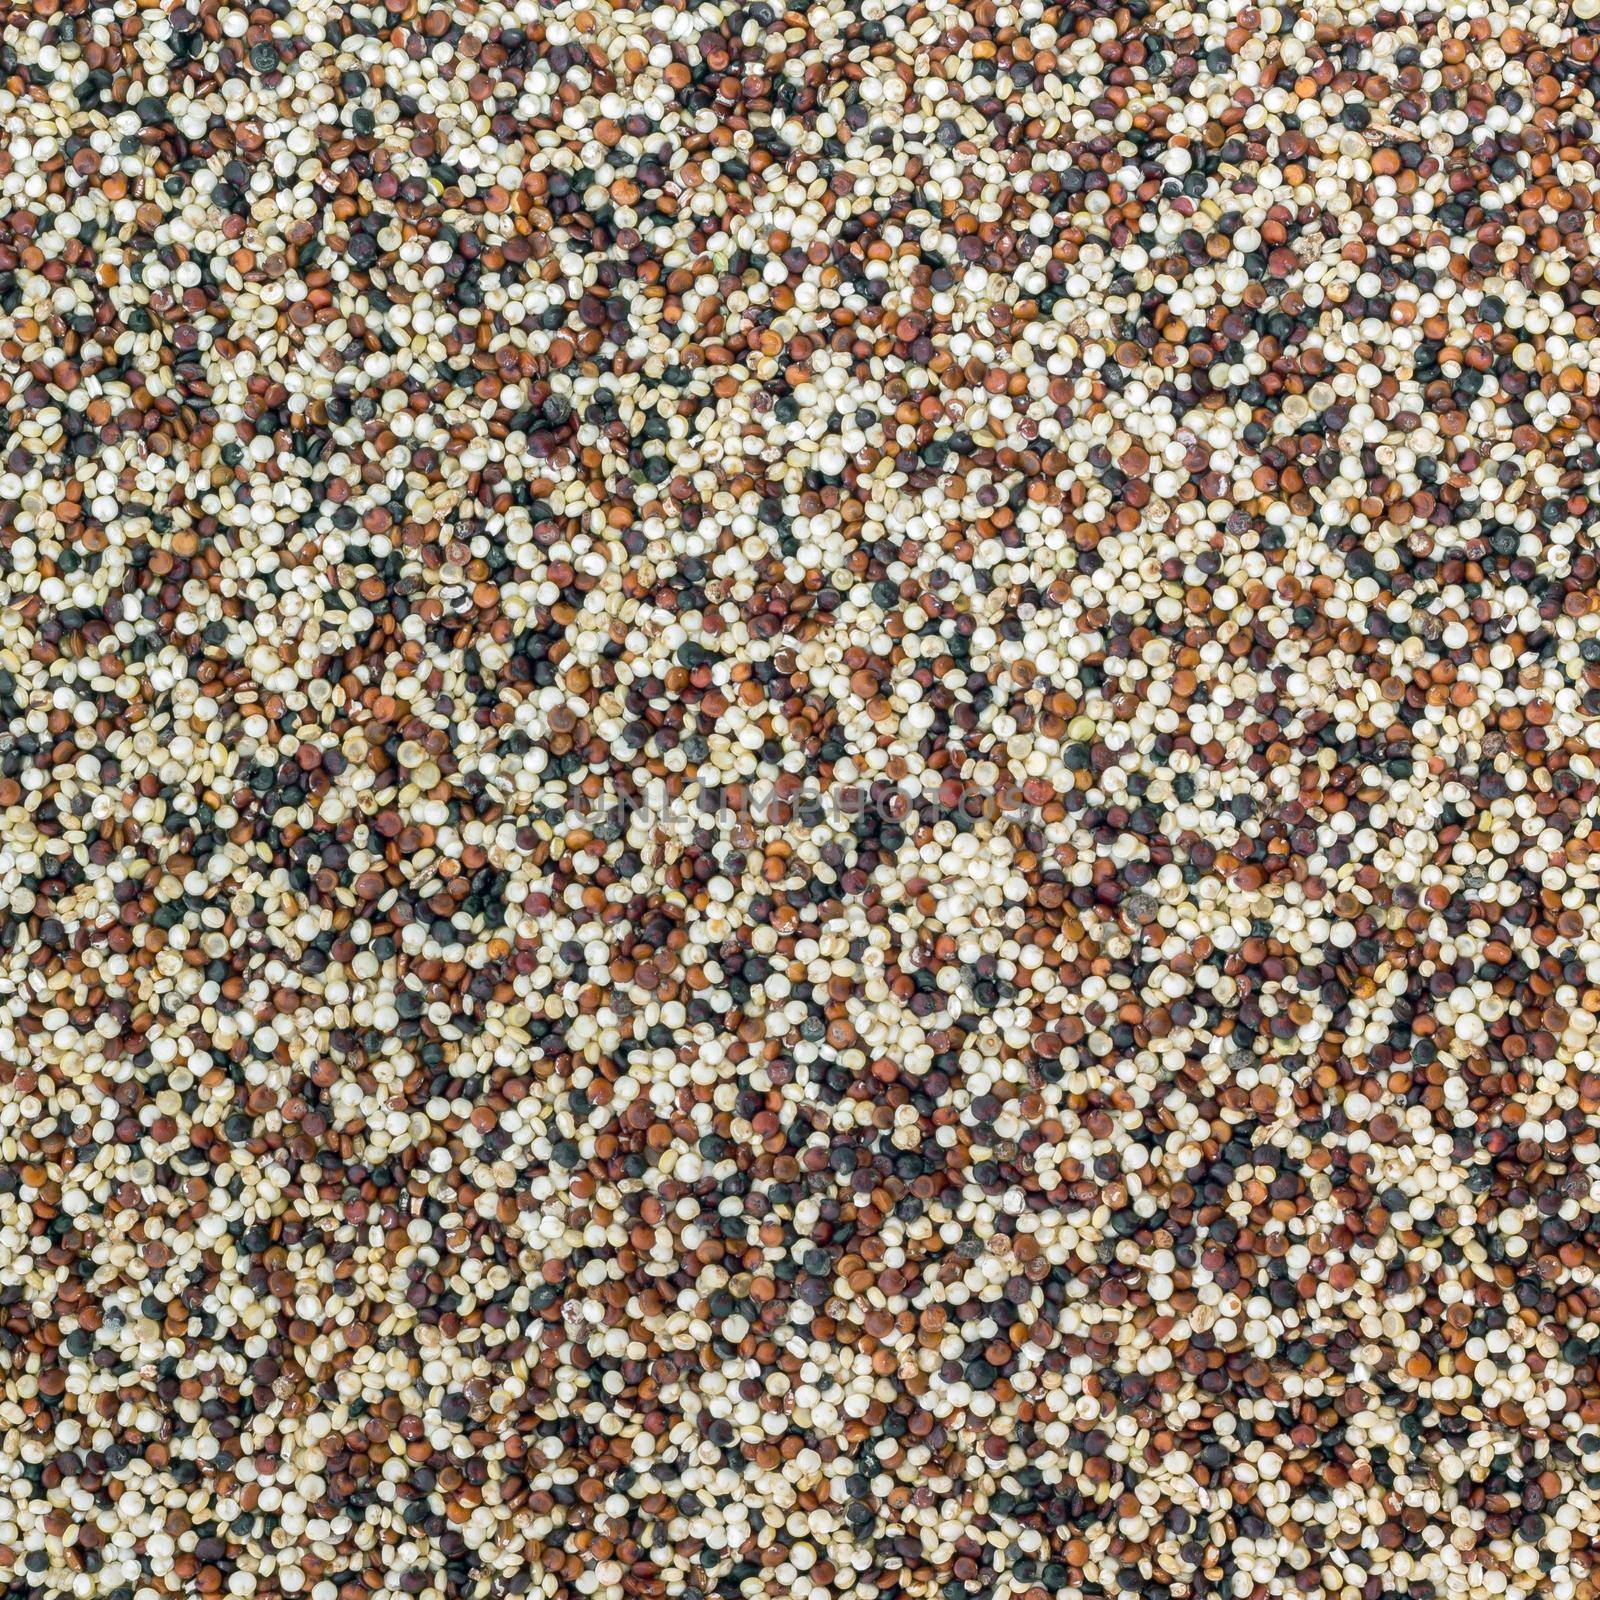 Seeds of uncooked quinoa. Mixed red, white and black quinoa as an abstract background texture. Seeds of uncooked quinoa. Superfood.